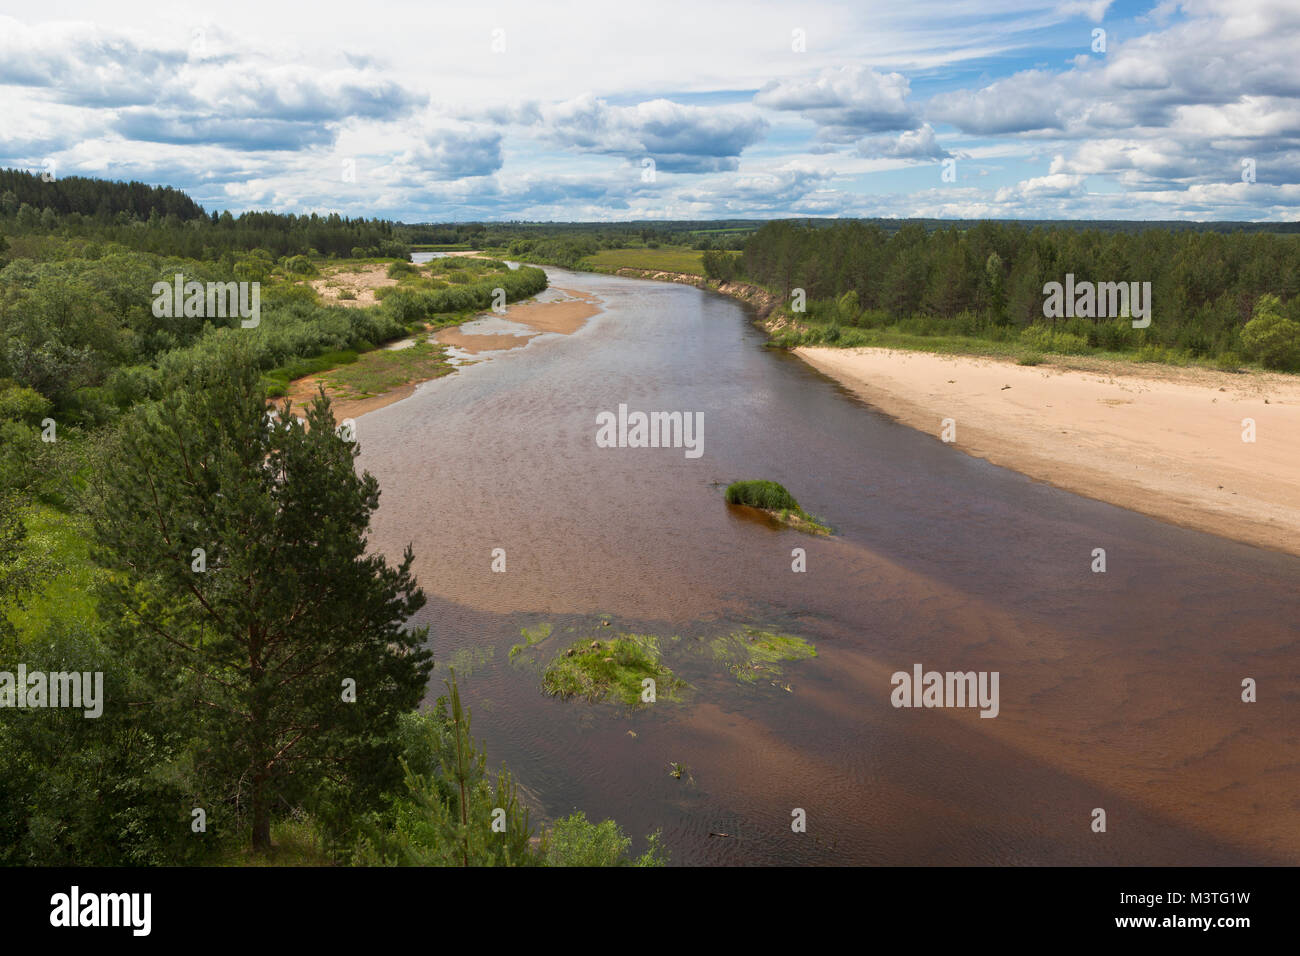 View of the river Vaga near the village Undercity, Velsky district, Arkhangelsk region, Russia Stock Photo